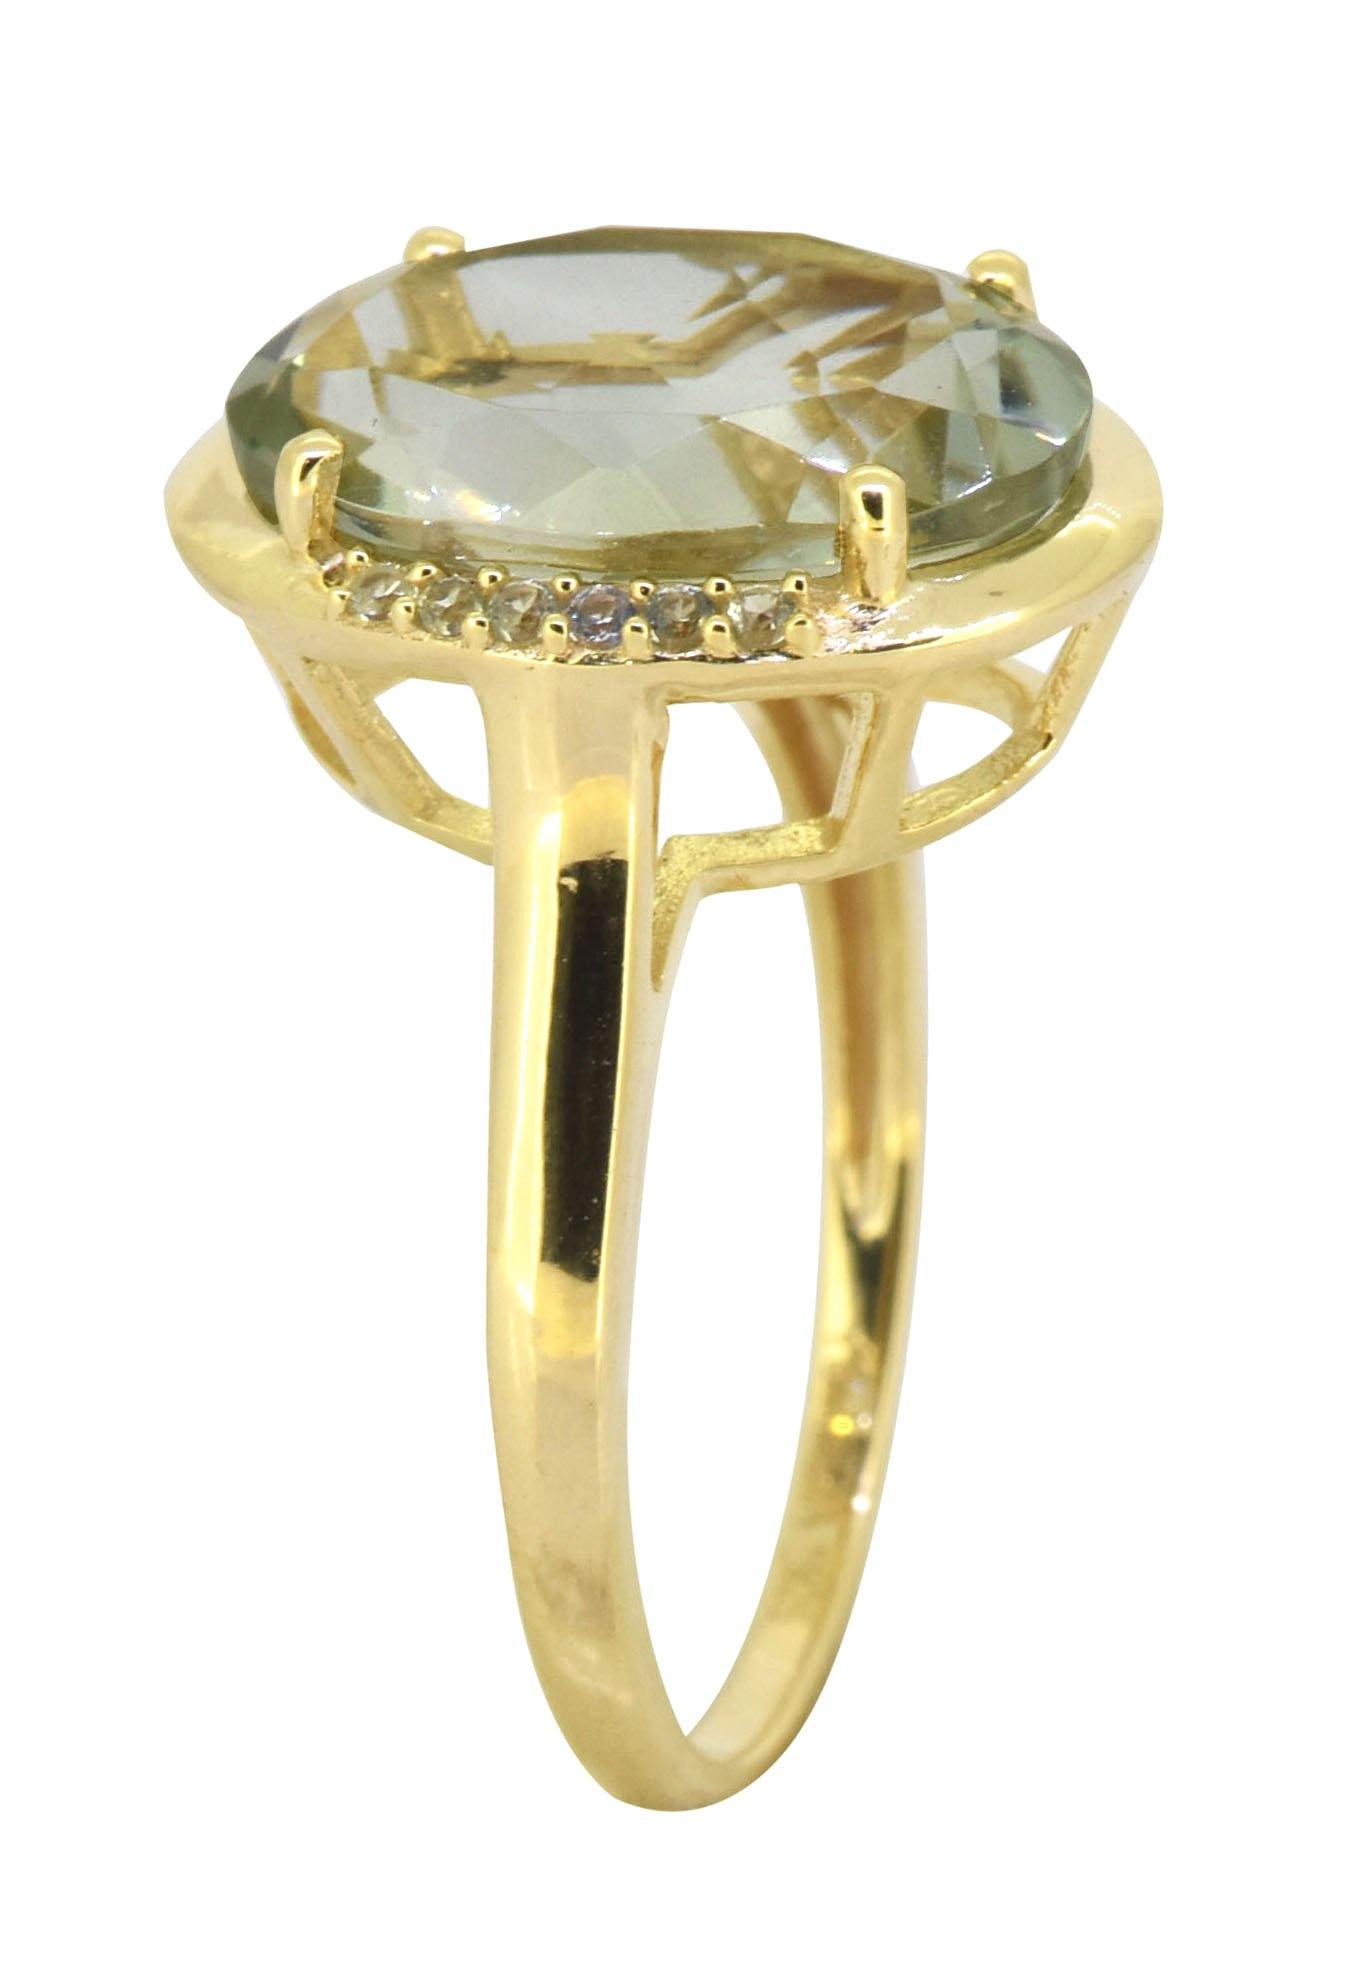 Green Amethyst Solid 925 Sterling Silver Gold Plated Ring Jewelry - YoTreasure